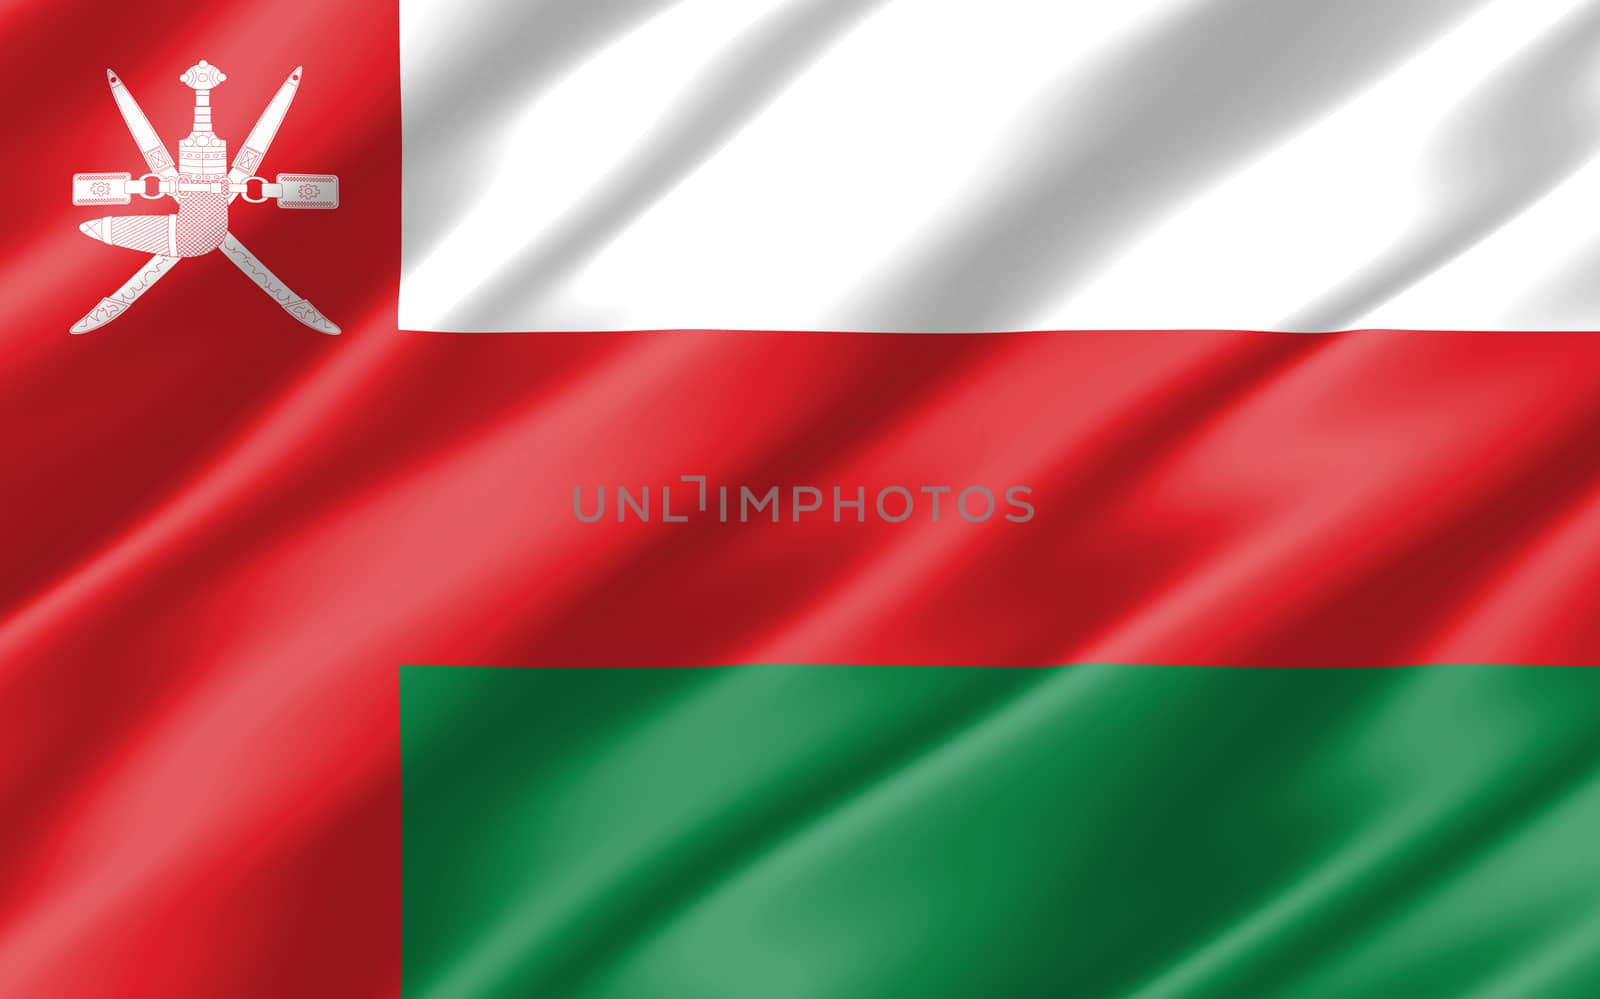 Silk wavy flag of Oman graphic. Wavy Omani flag illustration. Rippled Oman country flag is a symbol of freedom, patriotism and independence.